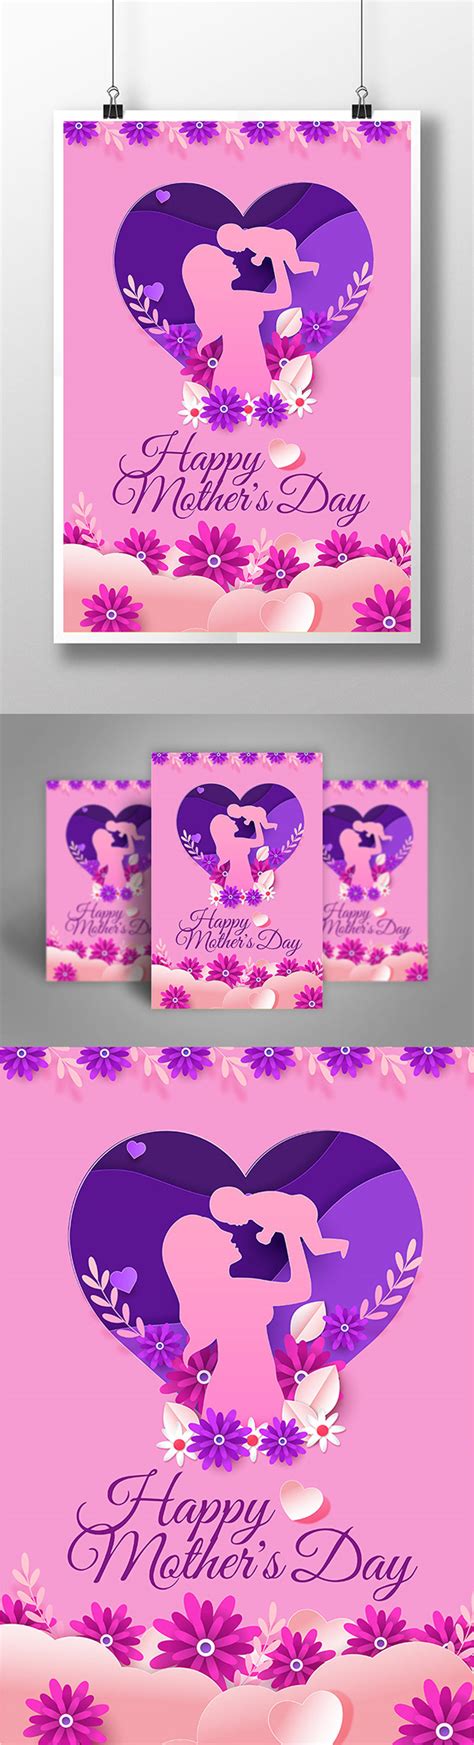 Mother S Day Poster Design With Mockup On Behance